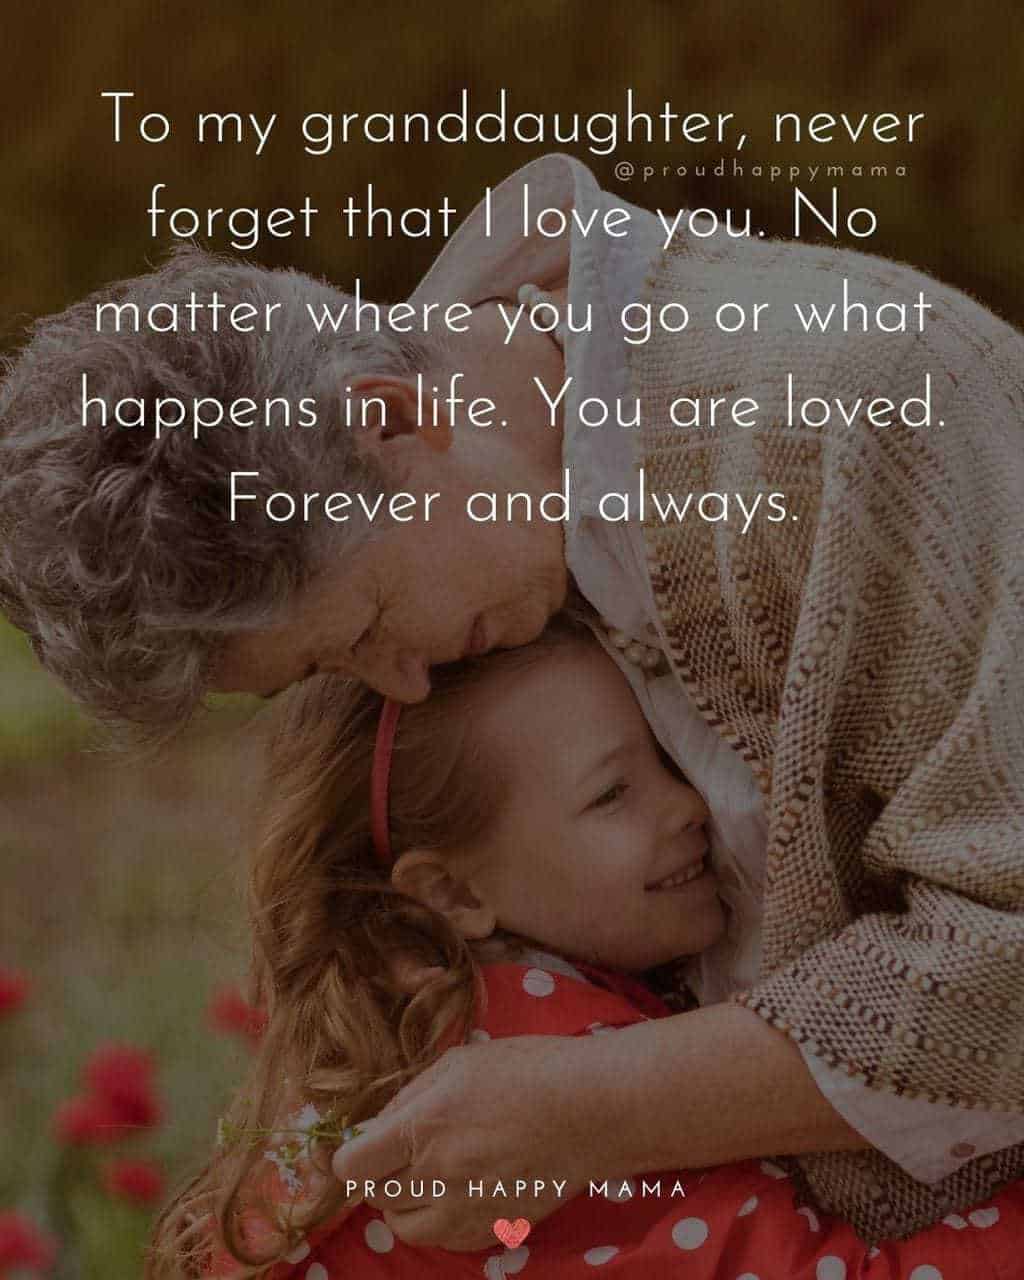 Granddaughter Quotes - To my granddaughter, never forget that I love you. No matter where you go or what happens in life. You